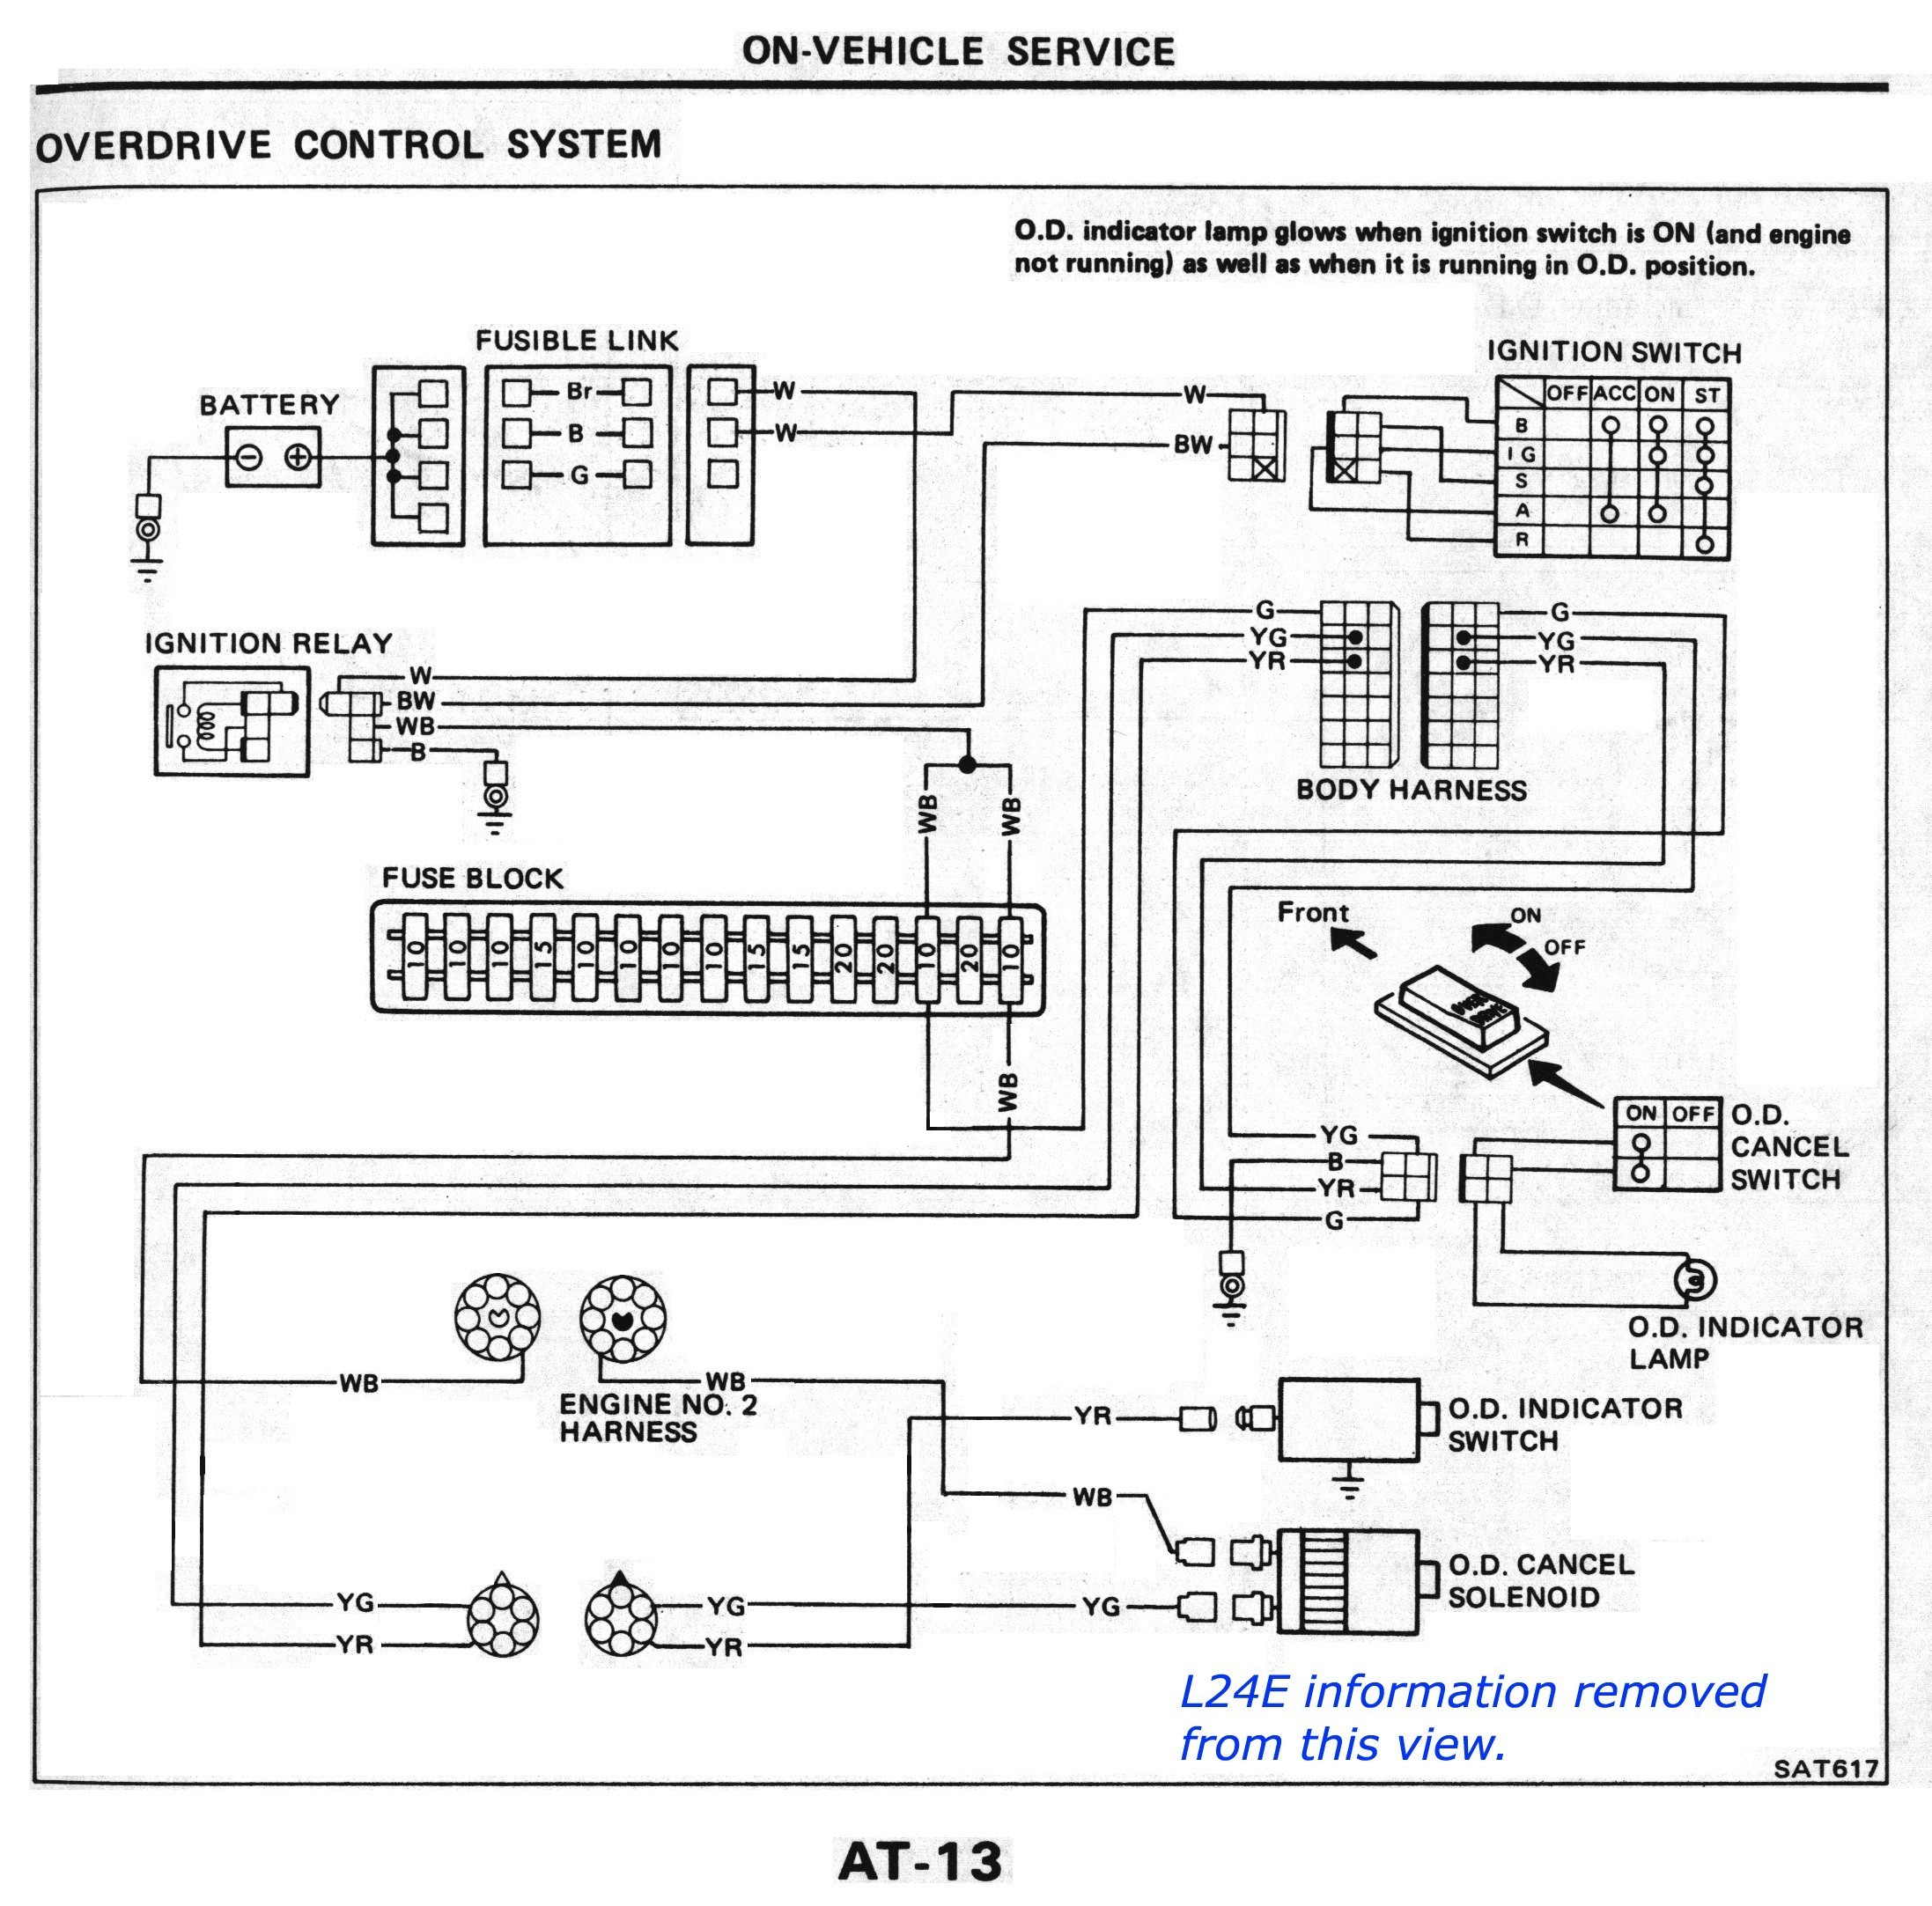 Engine Start button Wiring Diagram It S Clear now Both From the Owner S Manual